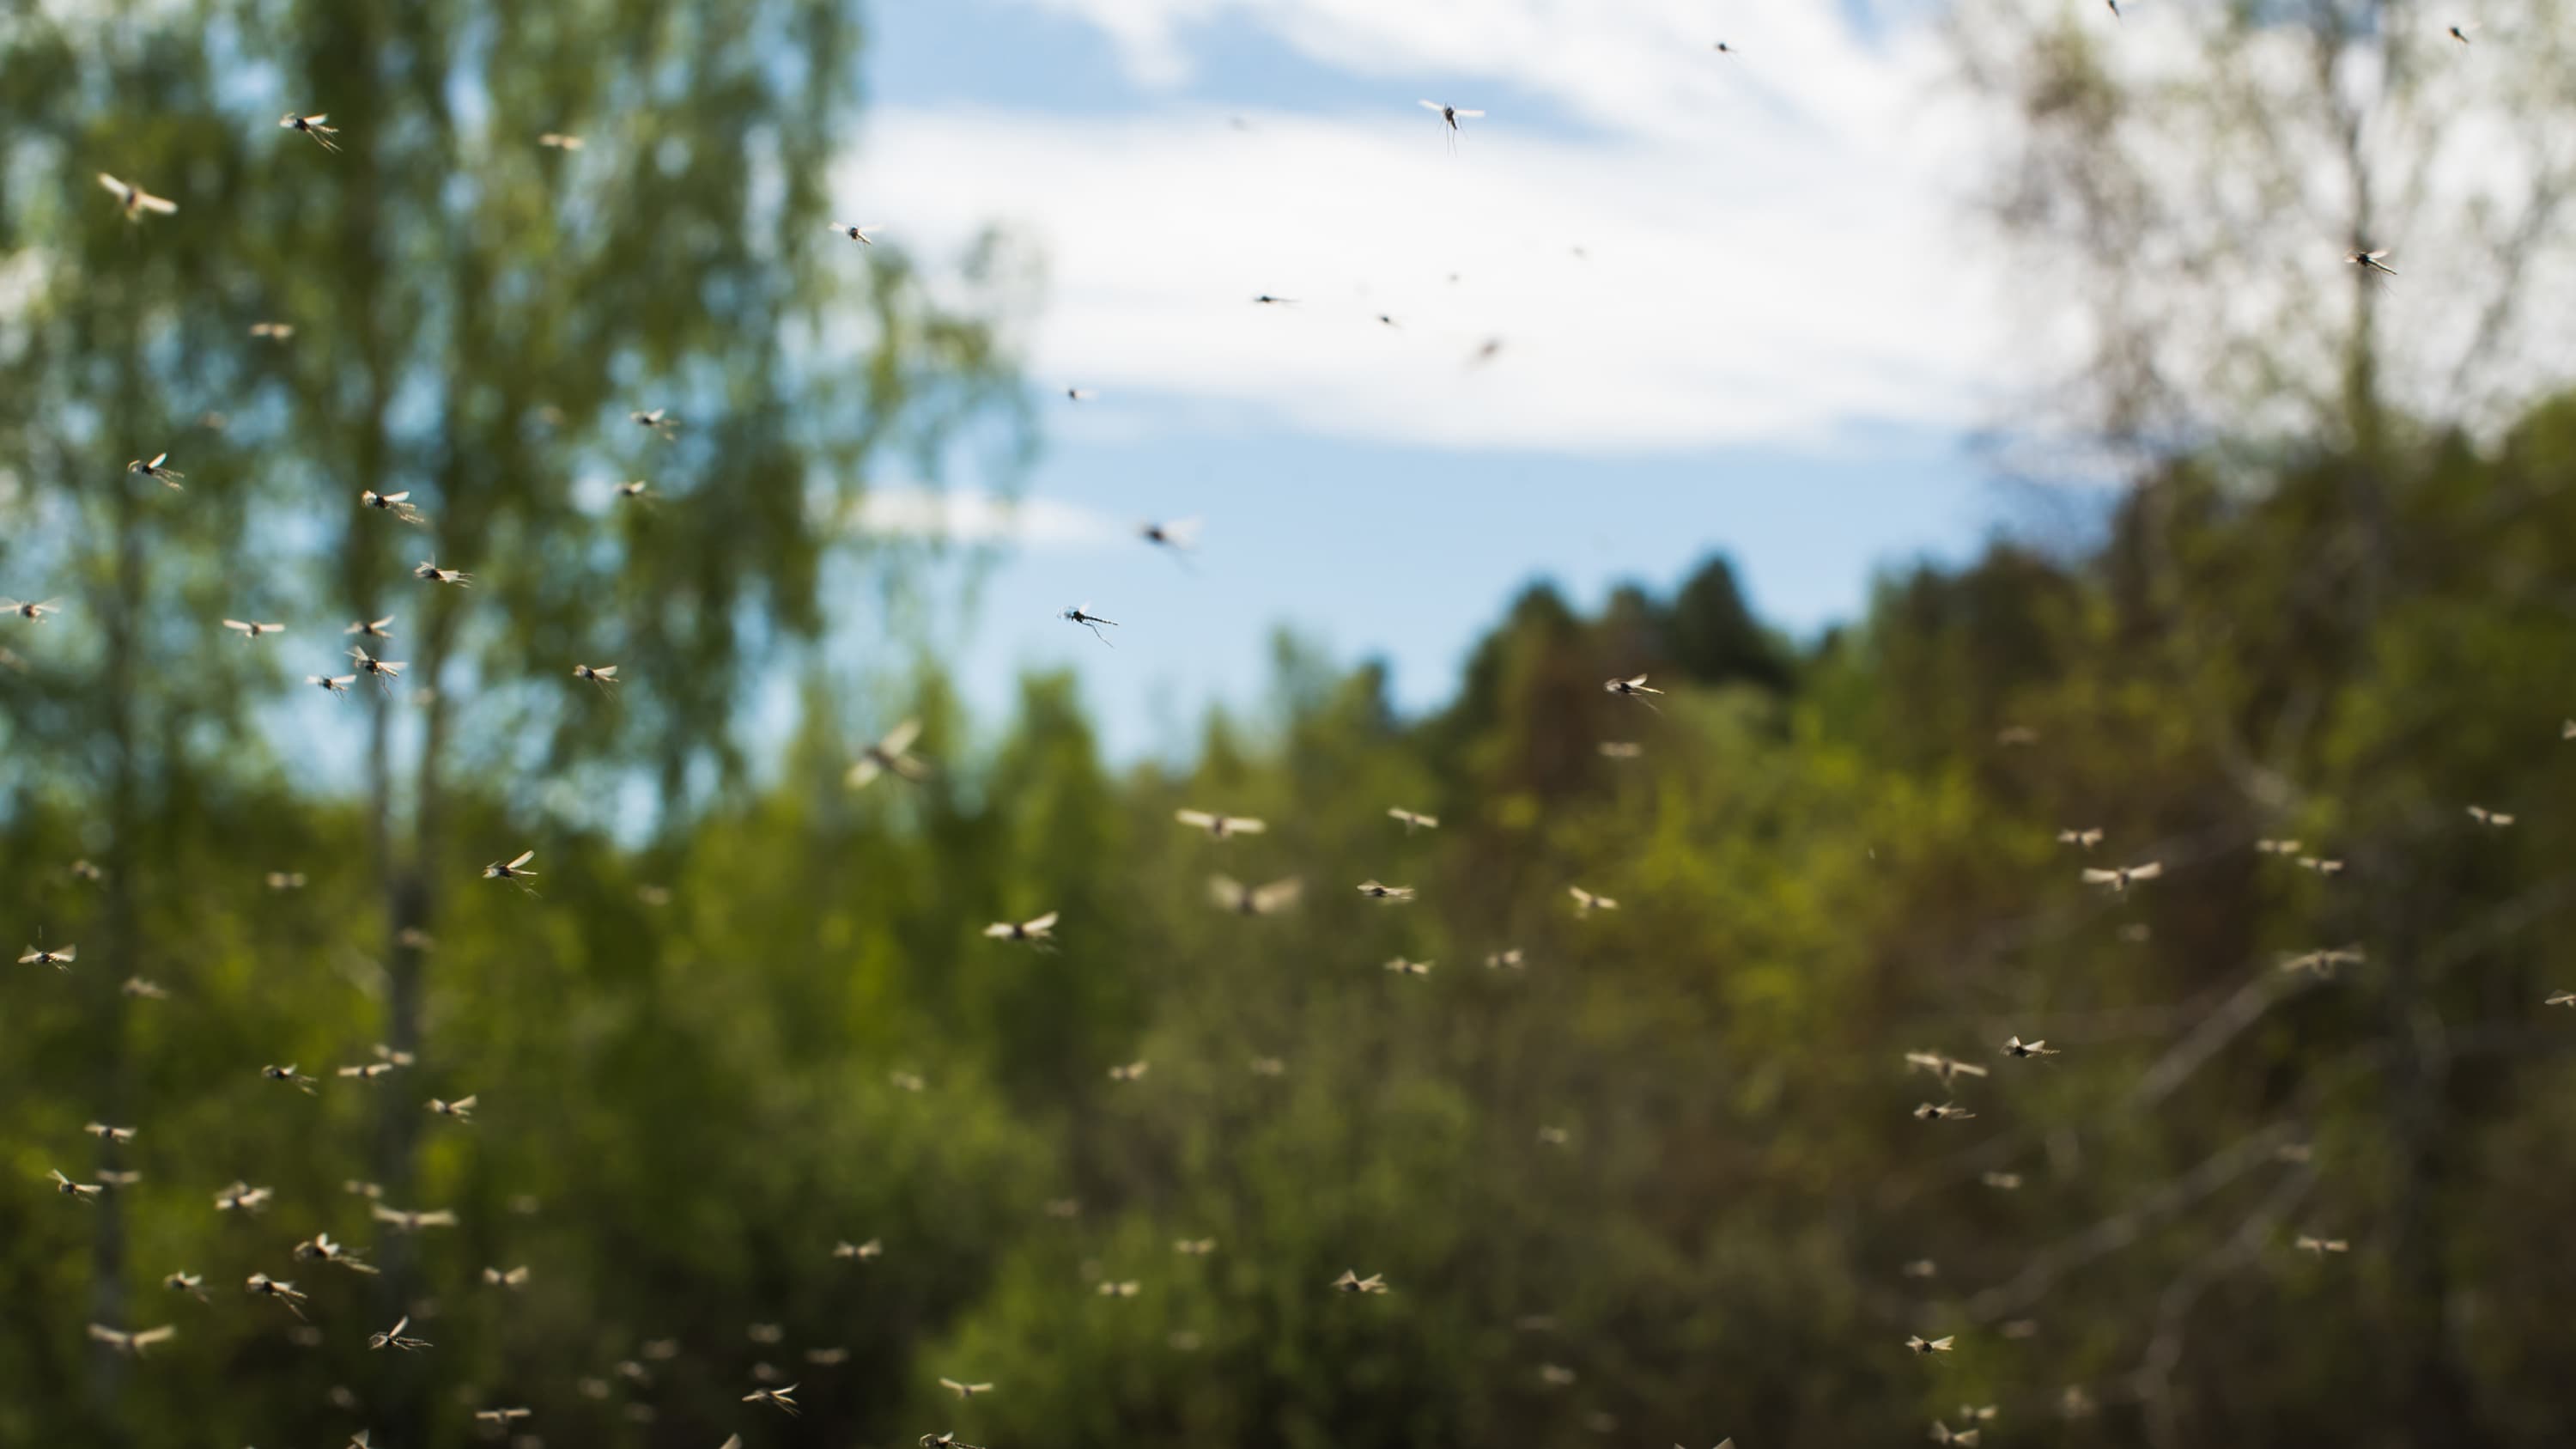 a swarming cloud of mosquitoes, which can carry parasitic diseases